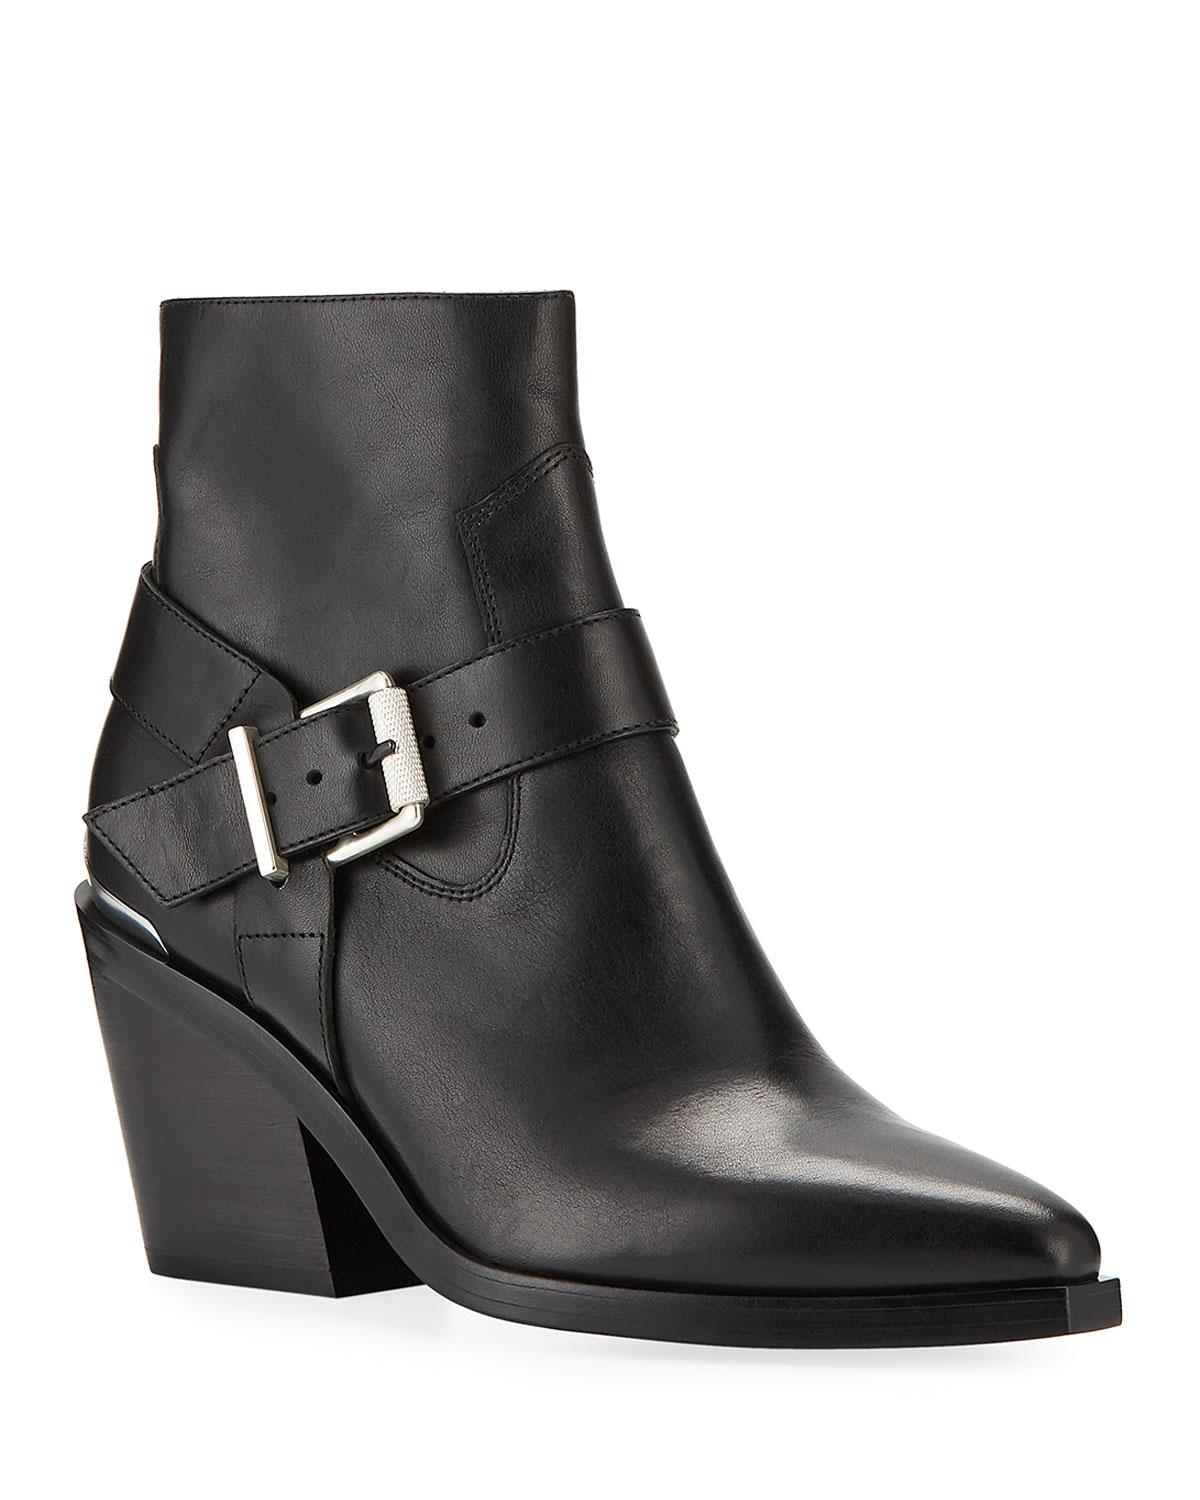 Rag & Bone Ryder Leather Ankle Boots in Black - Lyst